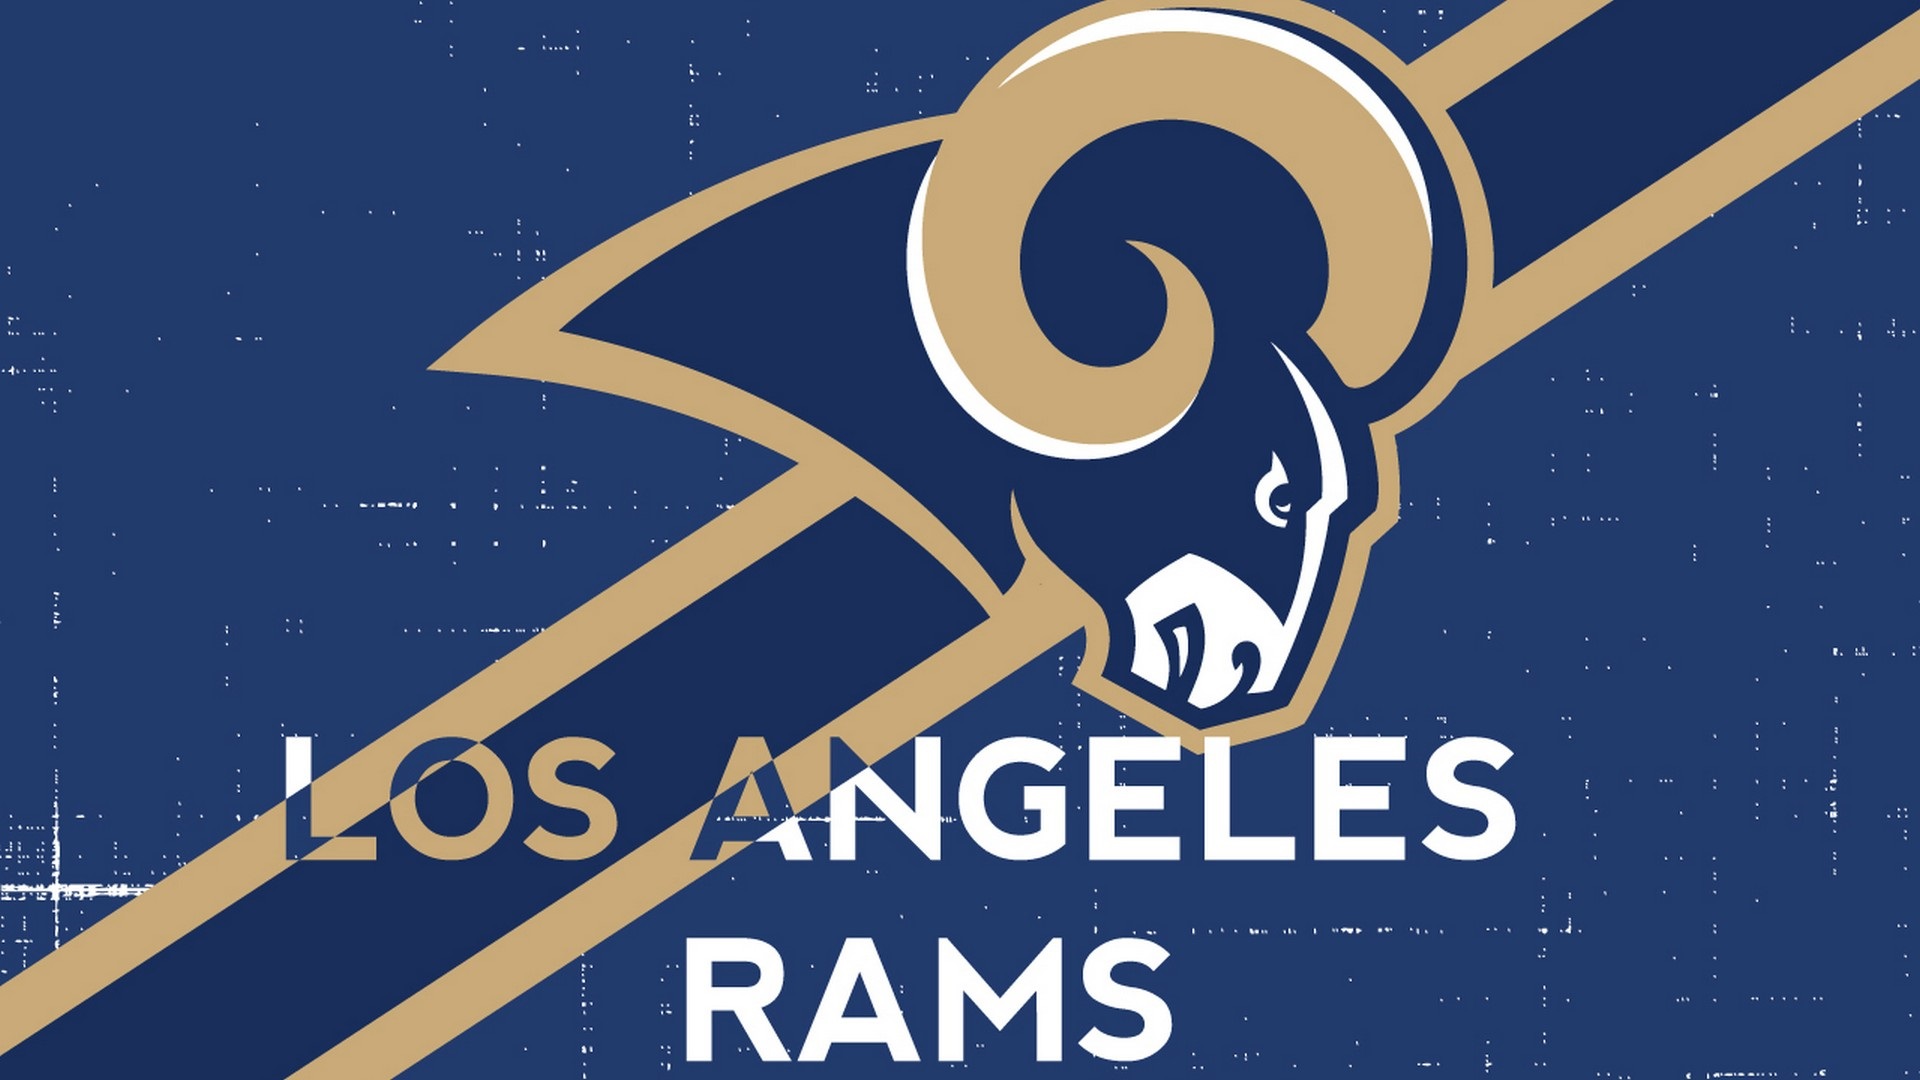 Los Angeles Rams Desktop Wallpapers with resolution 1920x1080 pixel. You can make this wallpaper for your Mac or Windows Desktop Background, iPhone, Android or Tablet and another Smartphone device